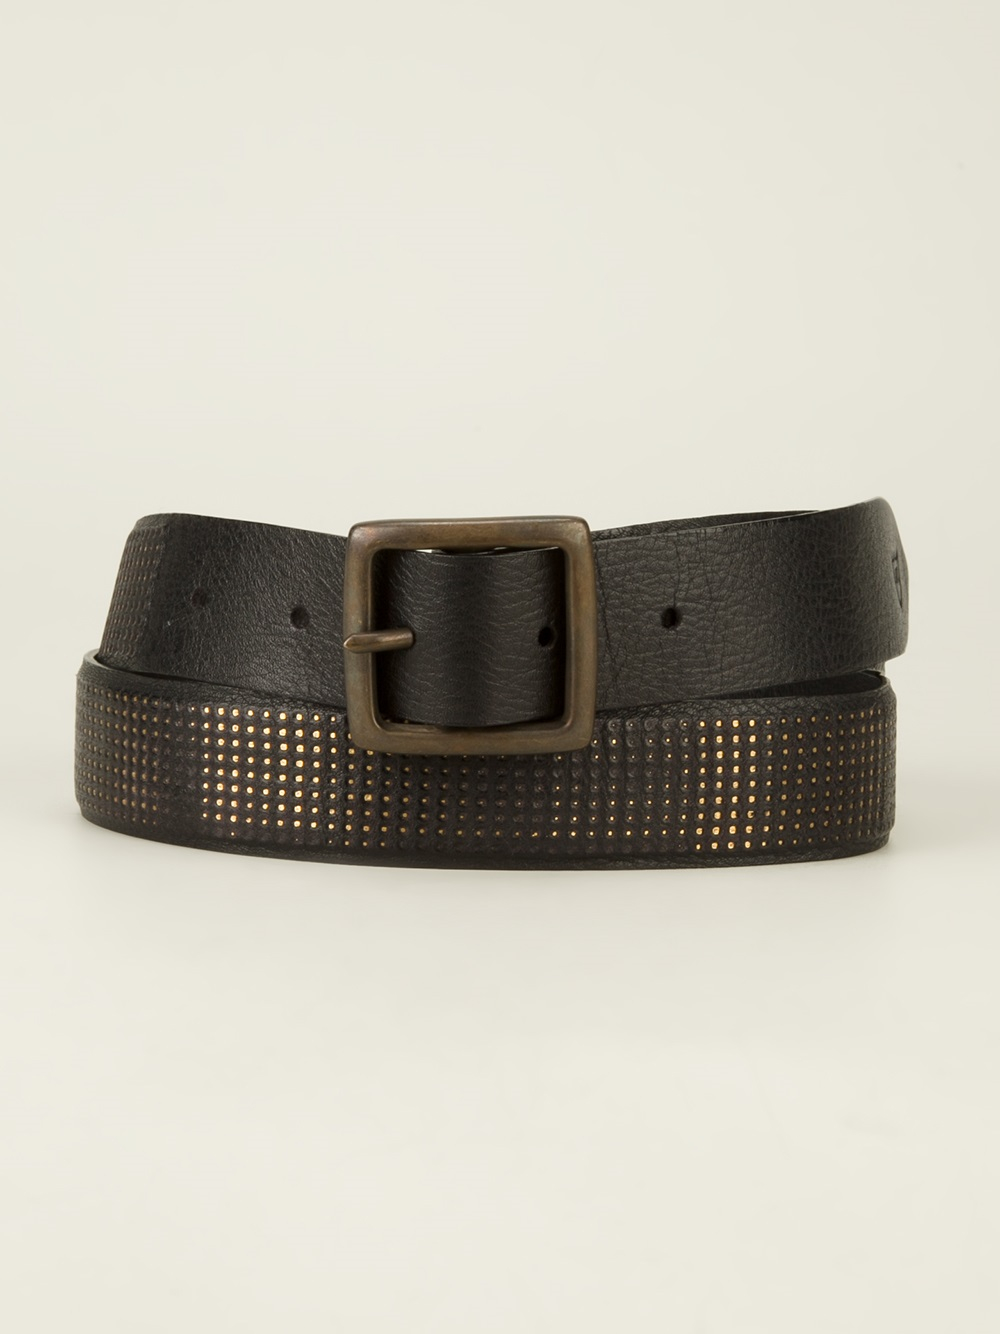 Htc hollywood trading company Studded Belt in Metallic for Men | Lyst